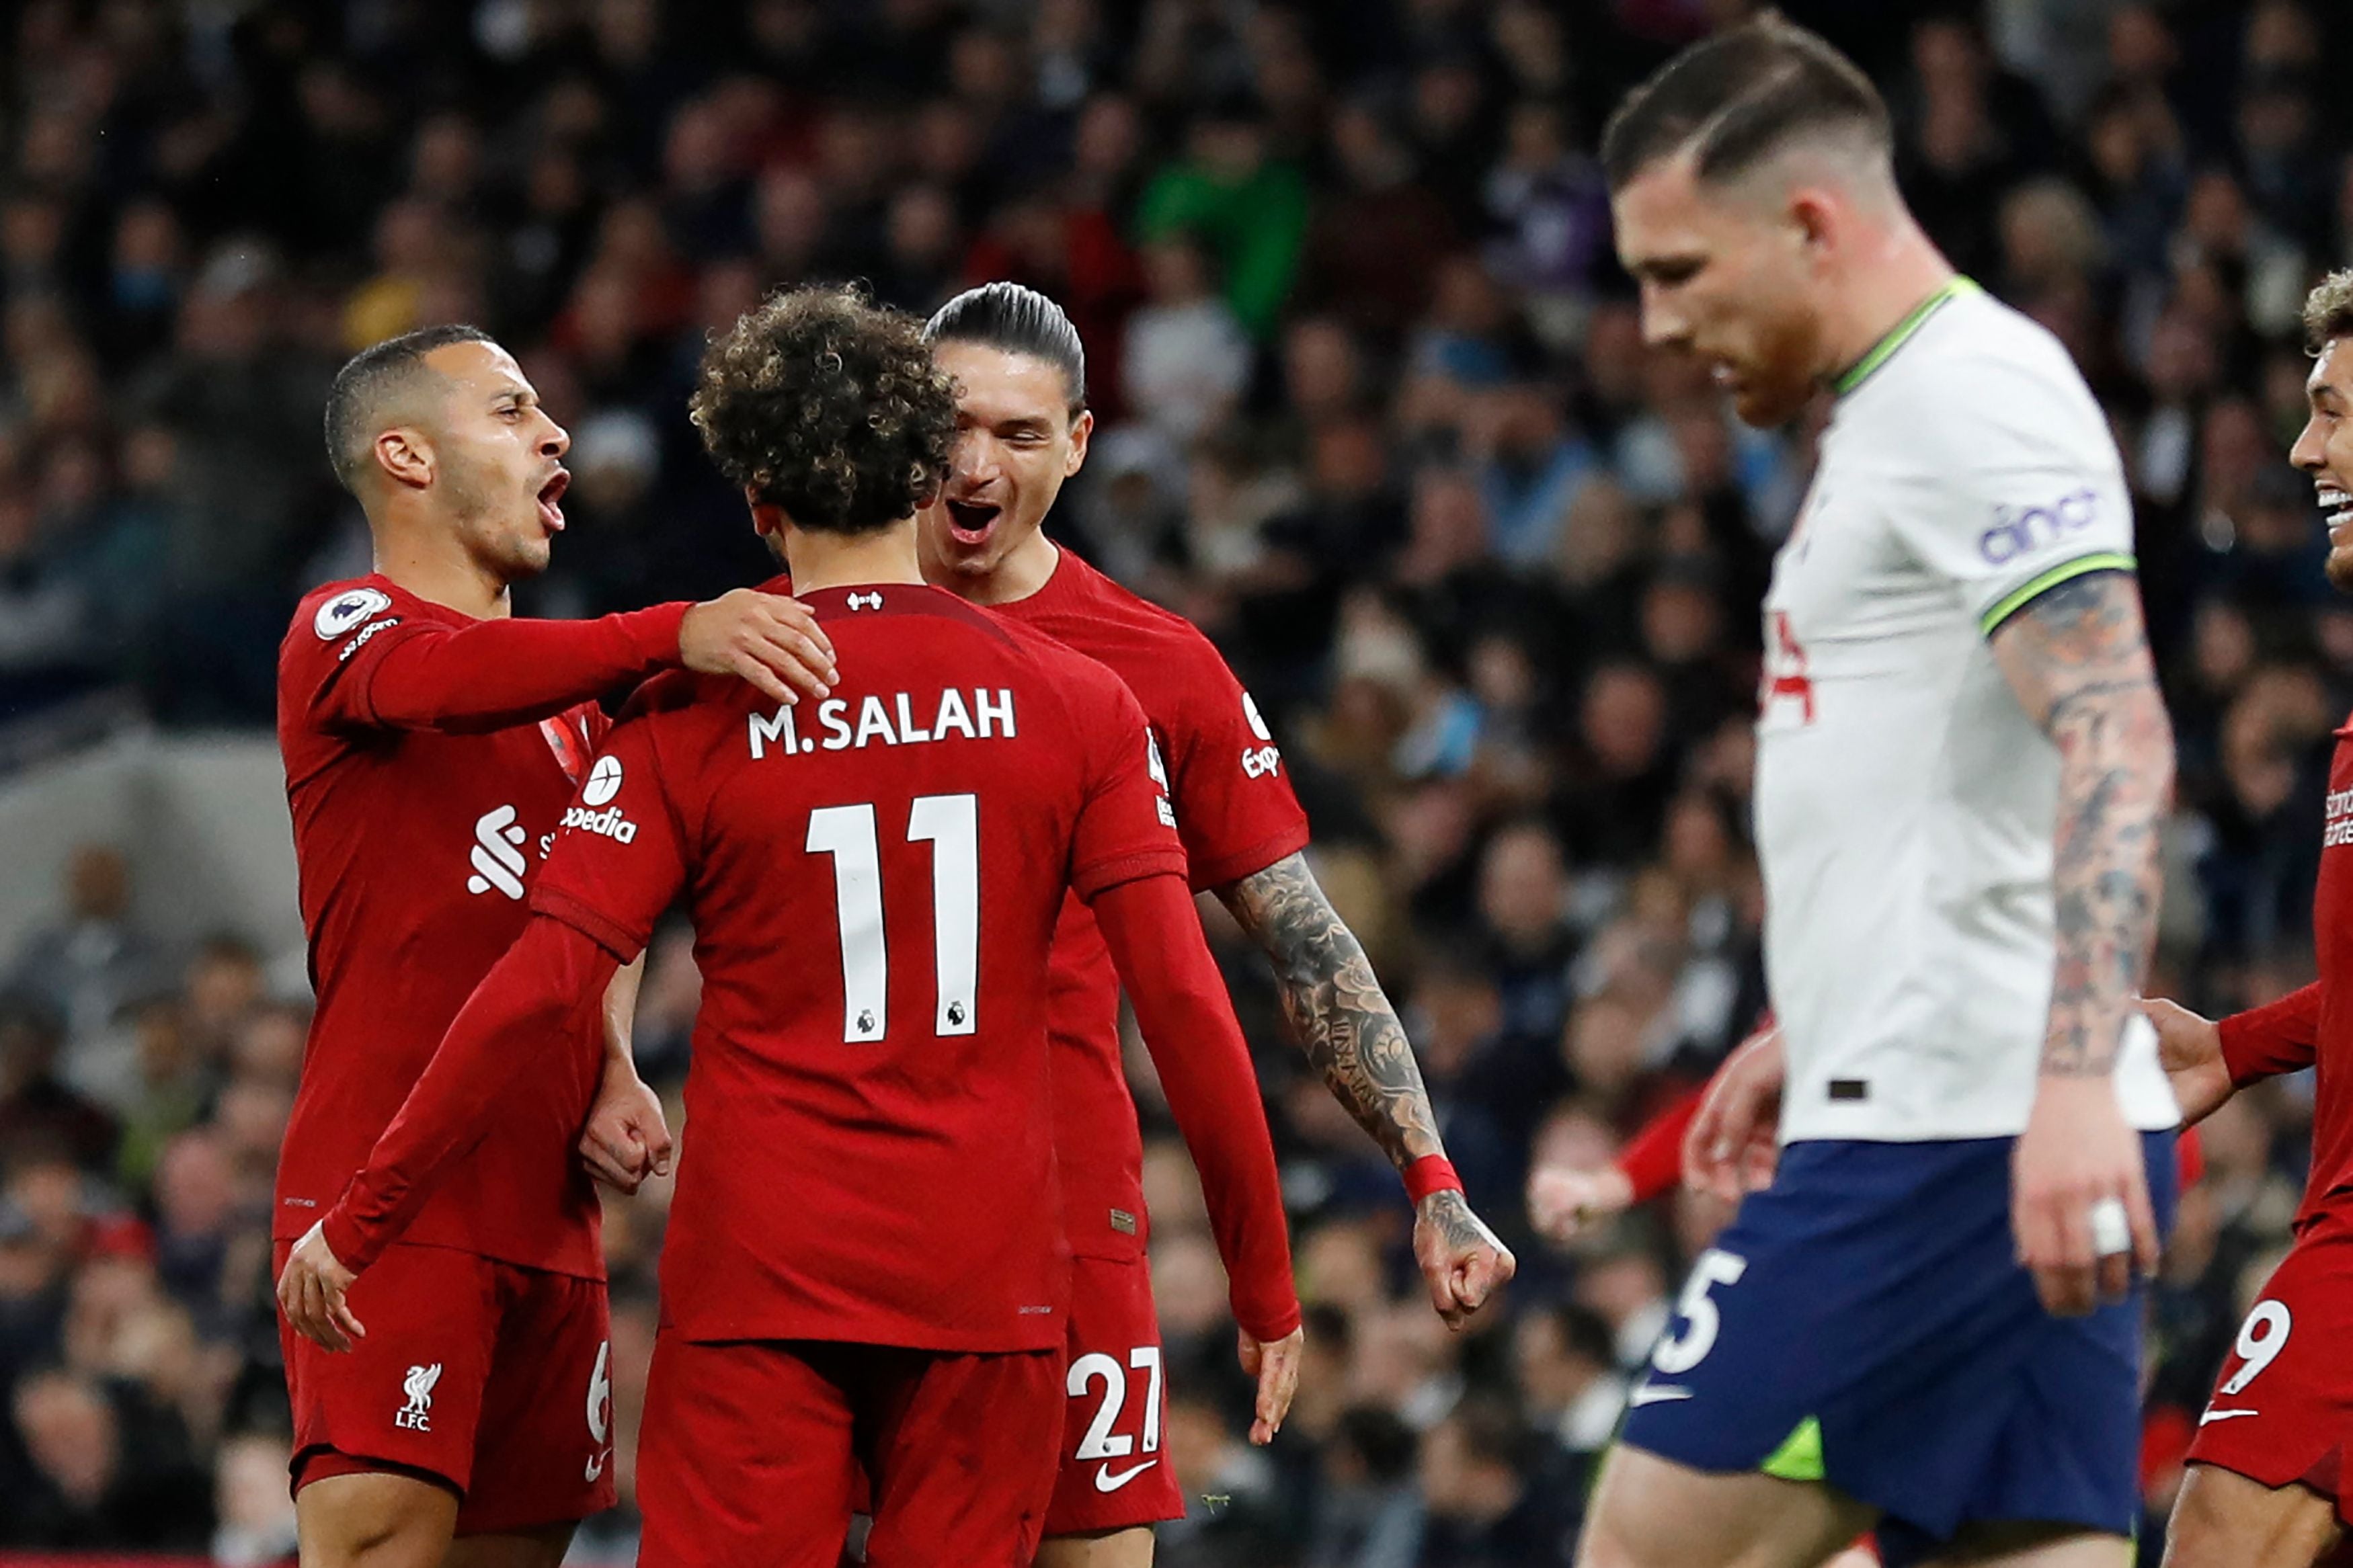 Salah netted twice in Liverpool’s victory